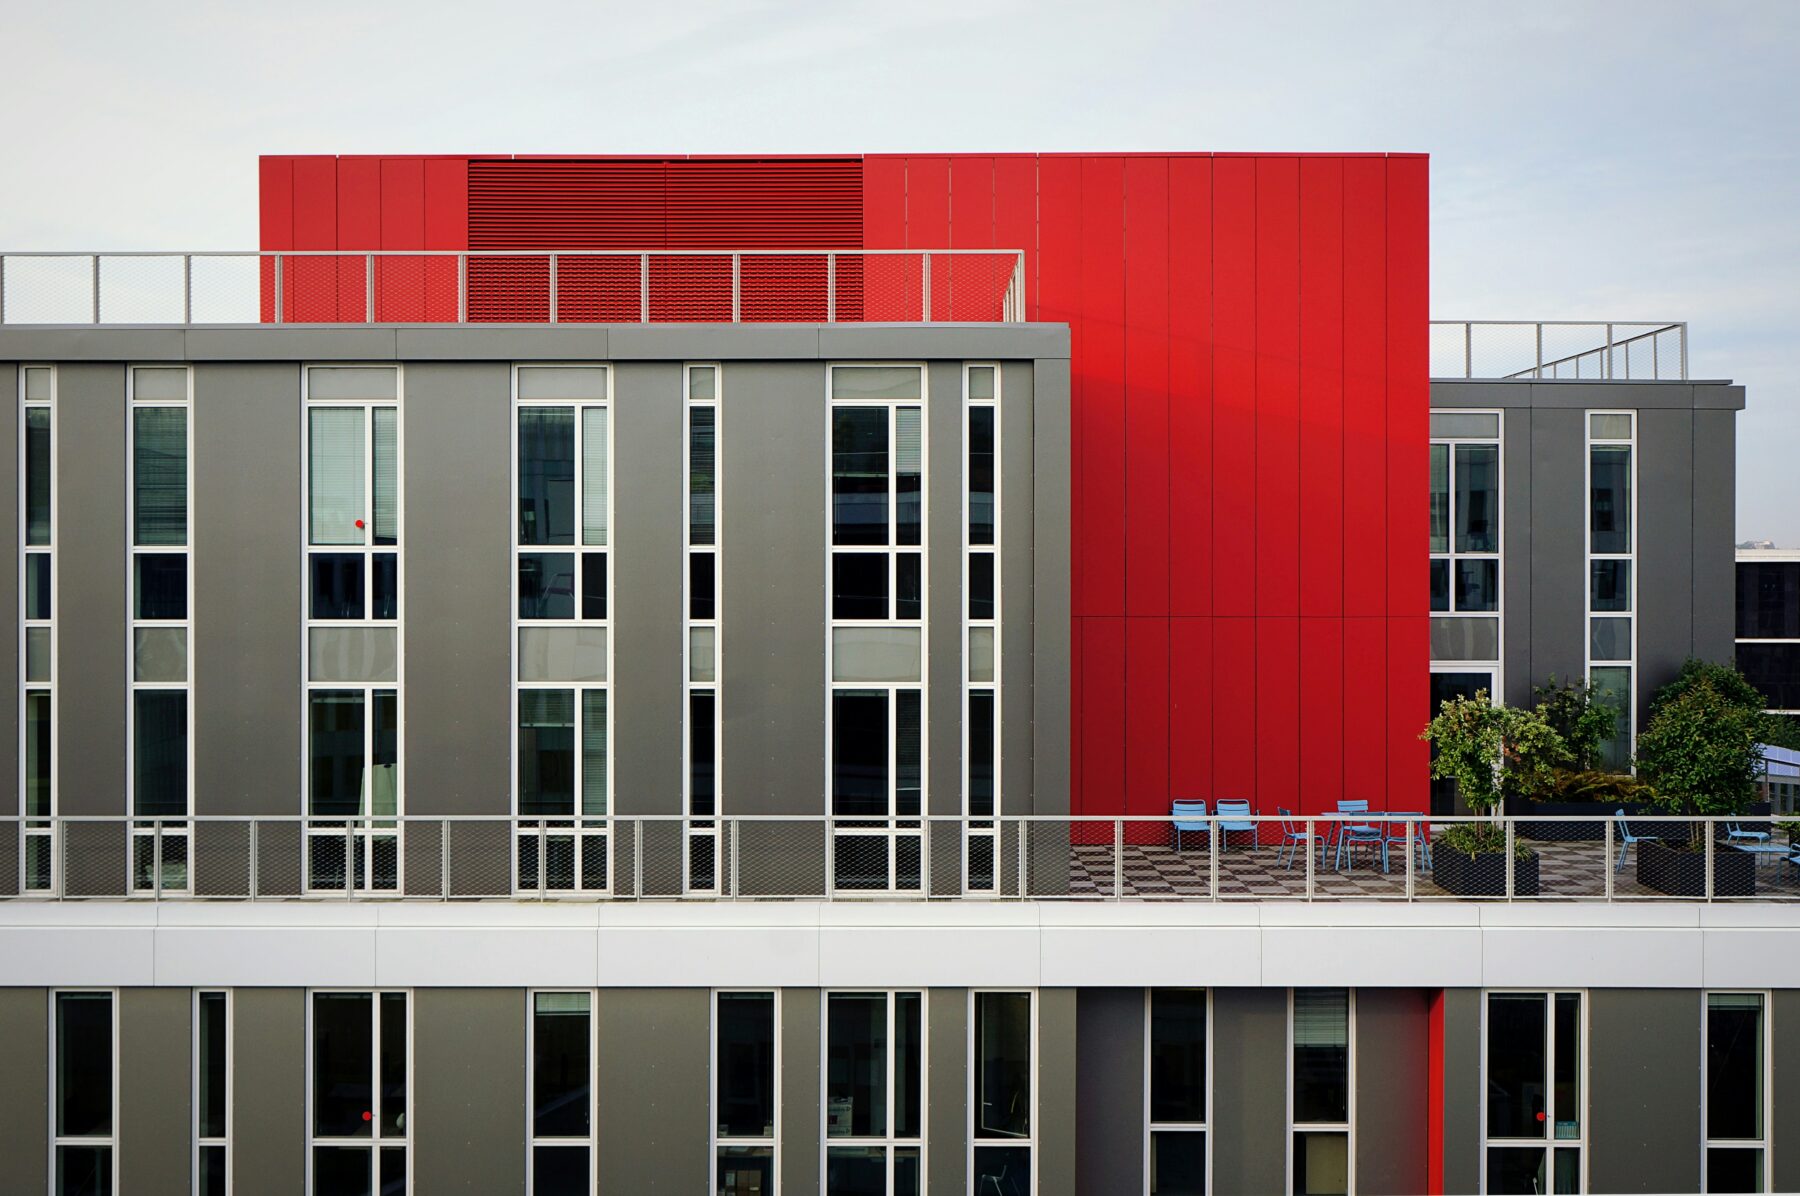 red and gray building and balconies-types of liens article